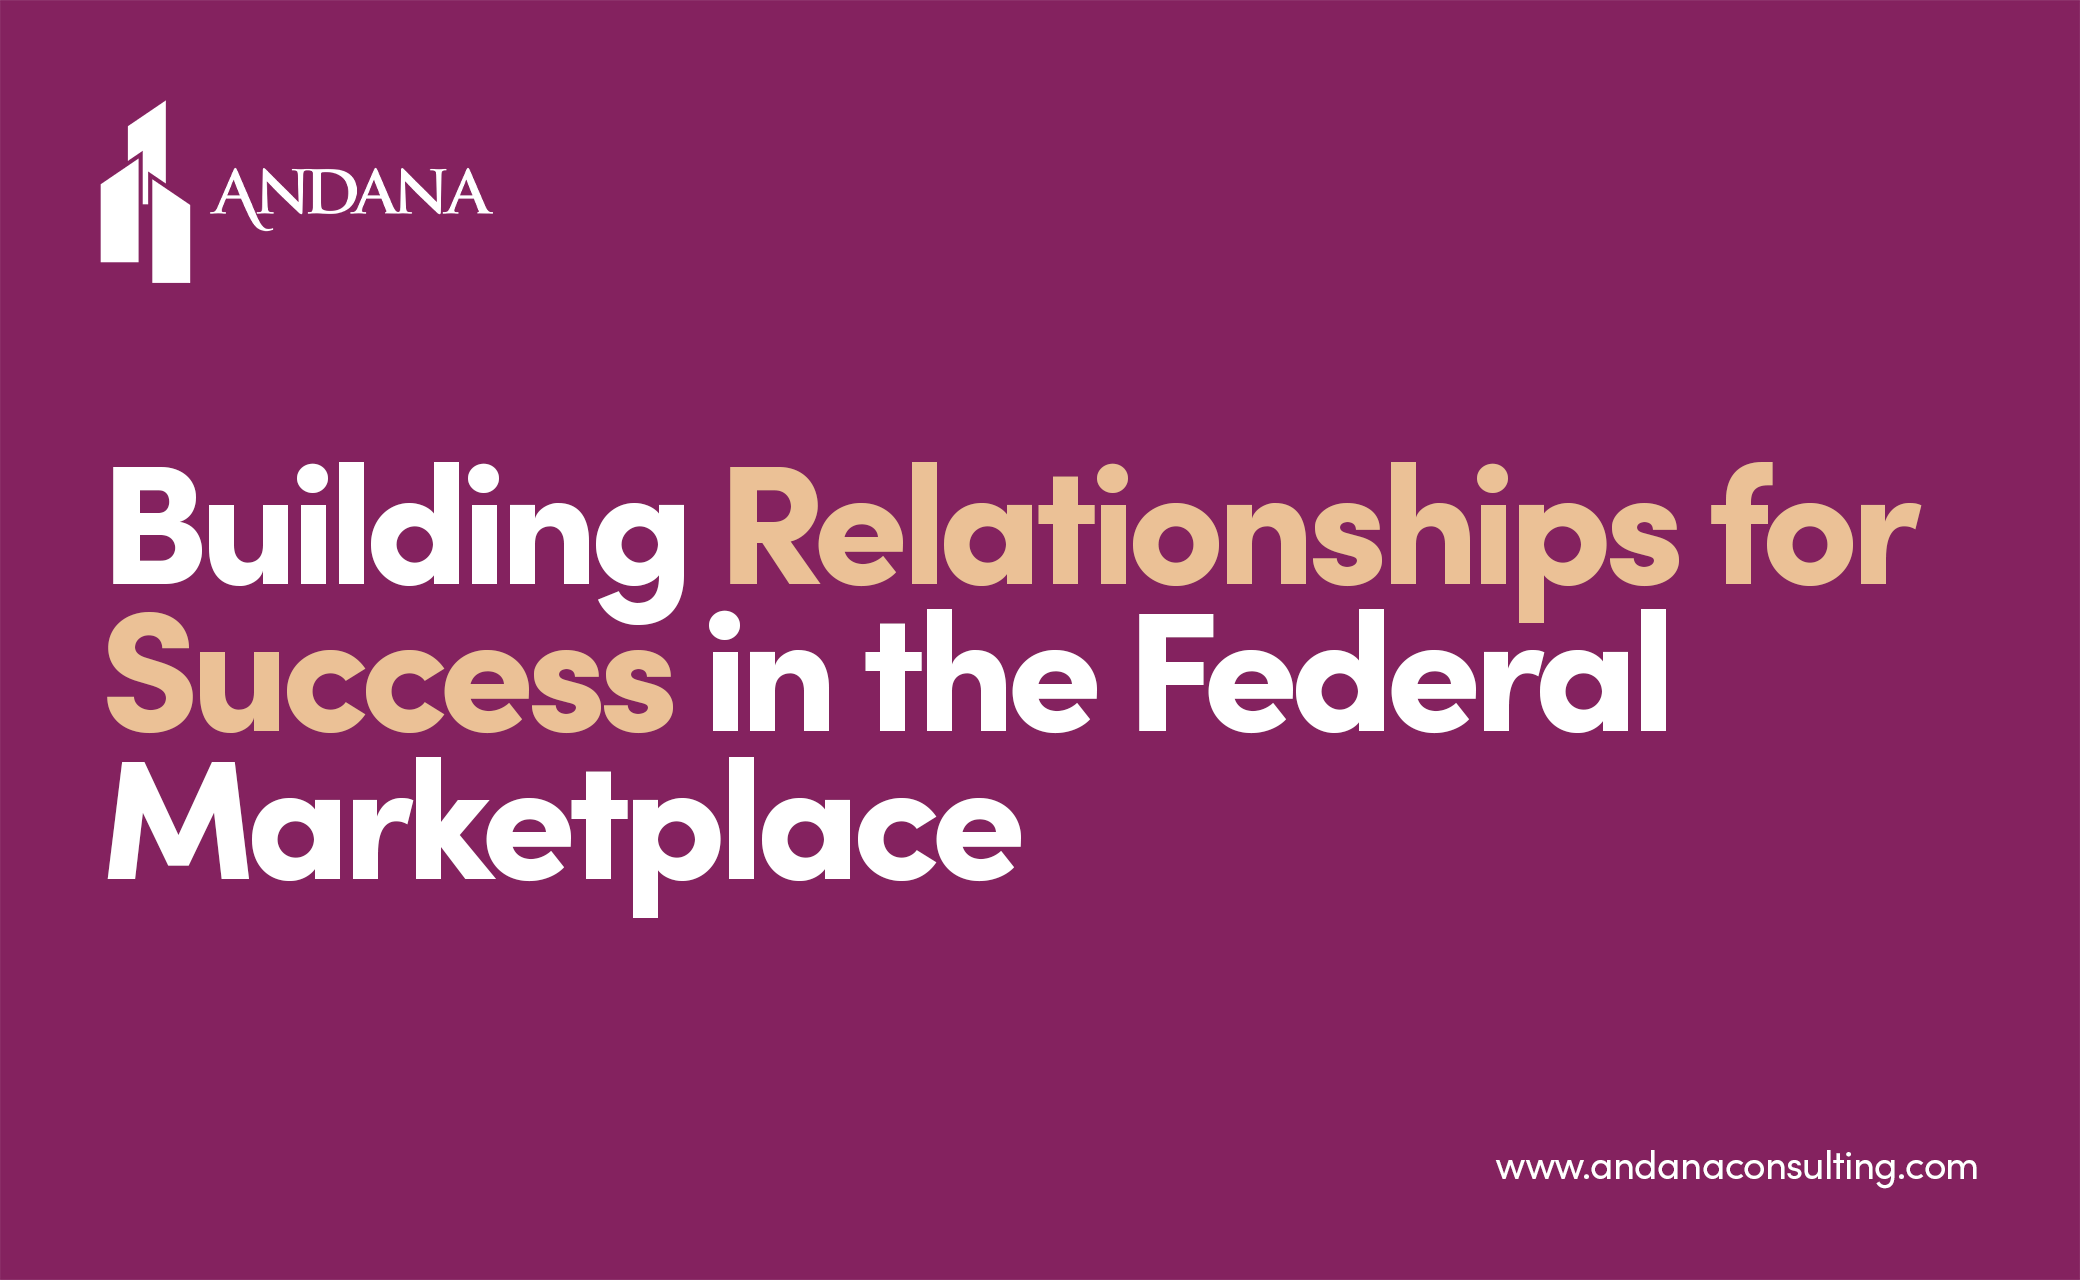 Building Relationships for Success in the Federal Marketplace